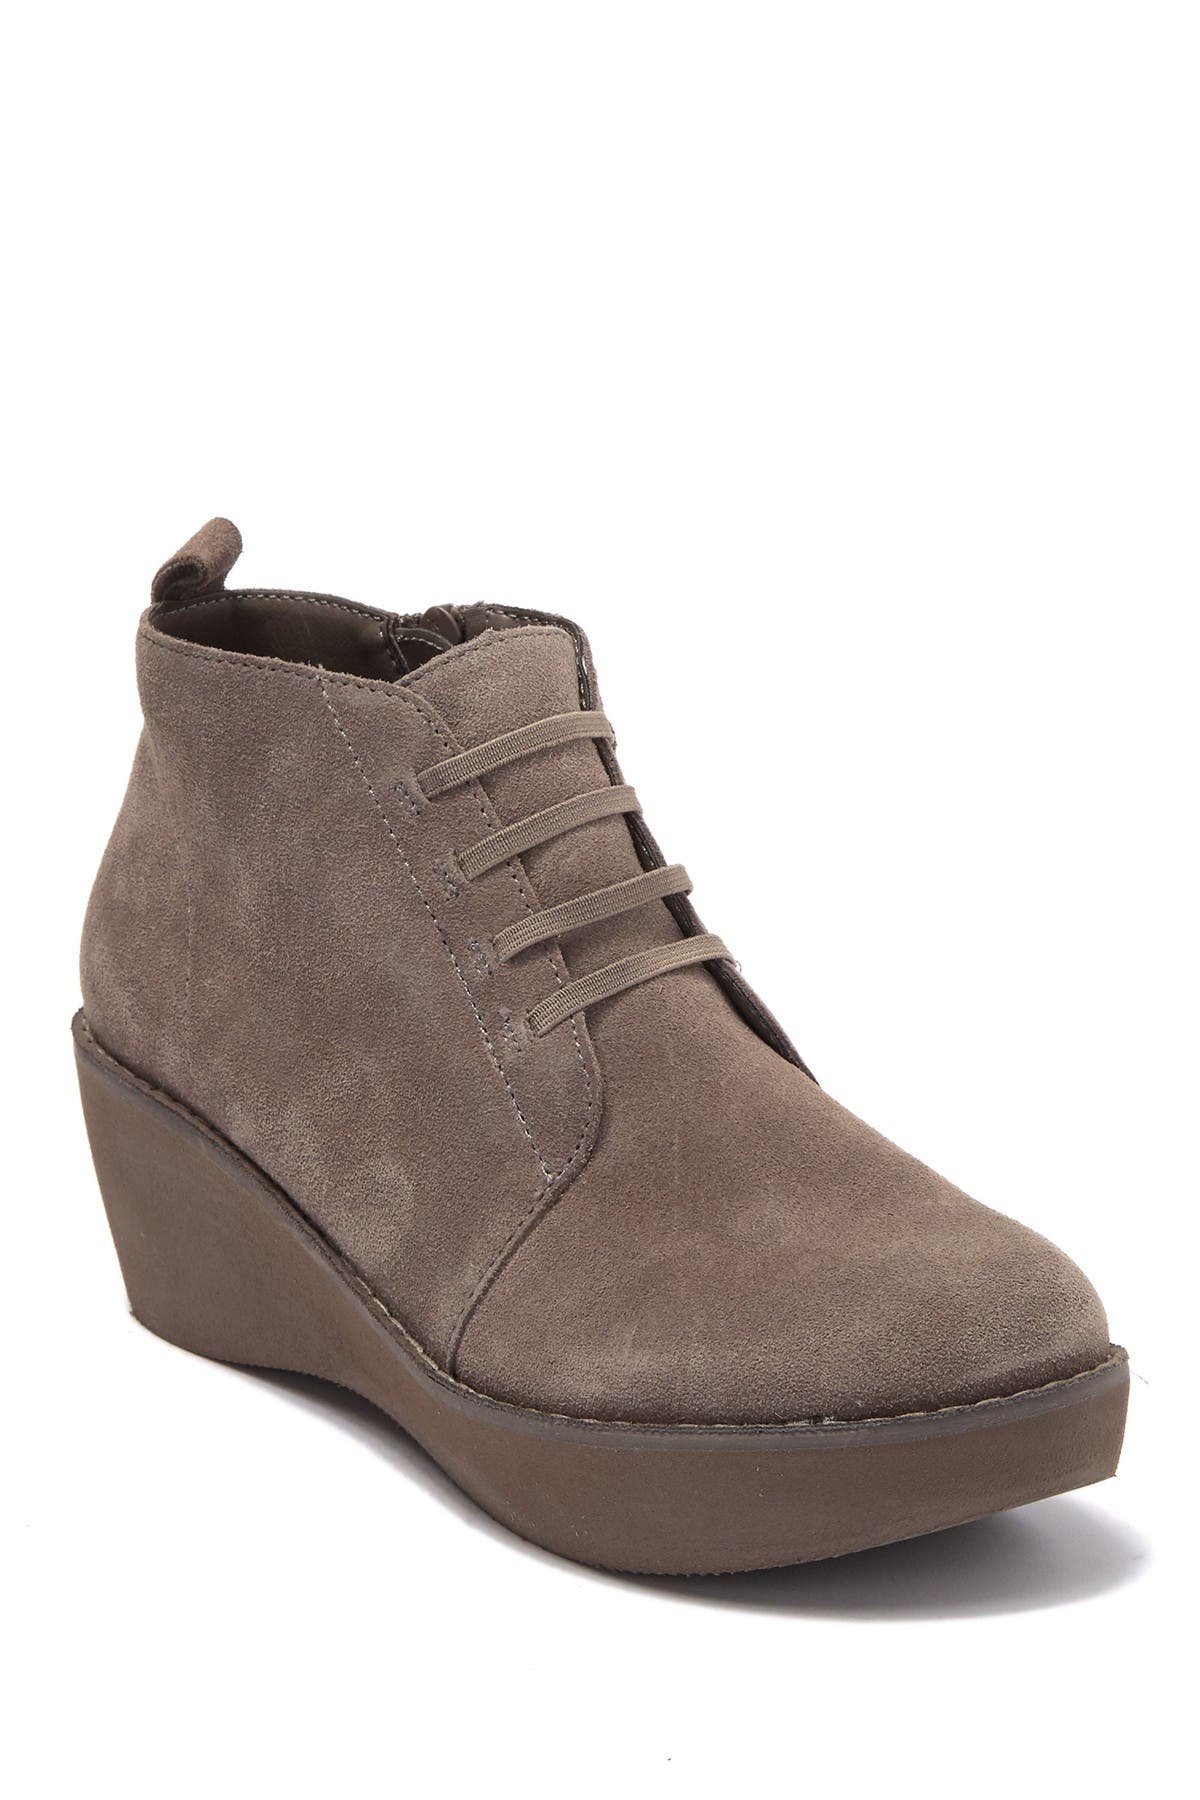 kenneth cole reaction prime bootie